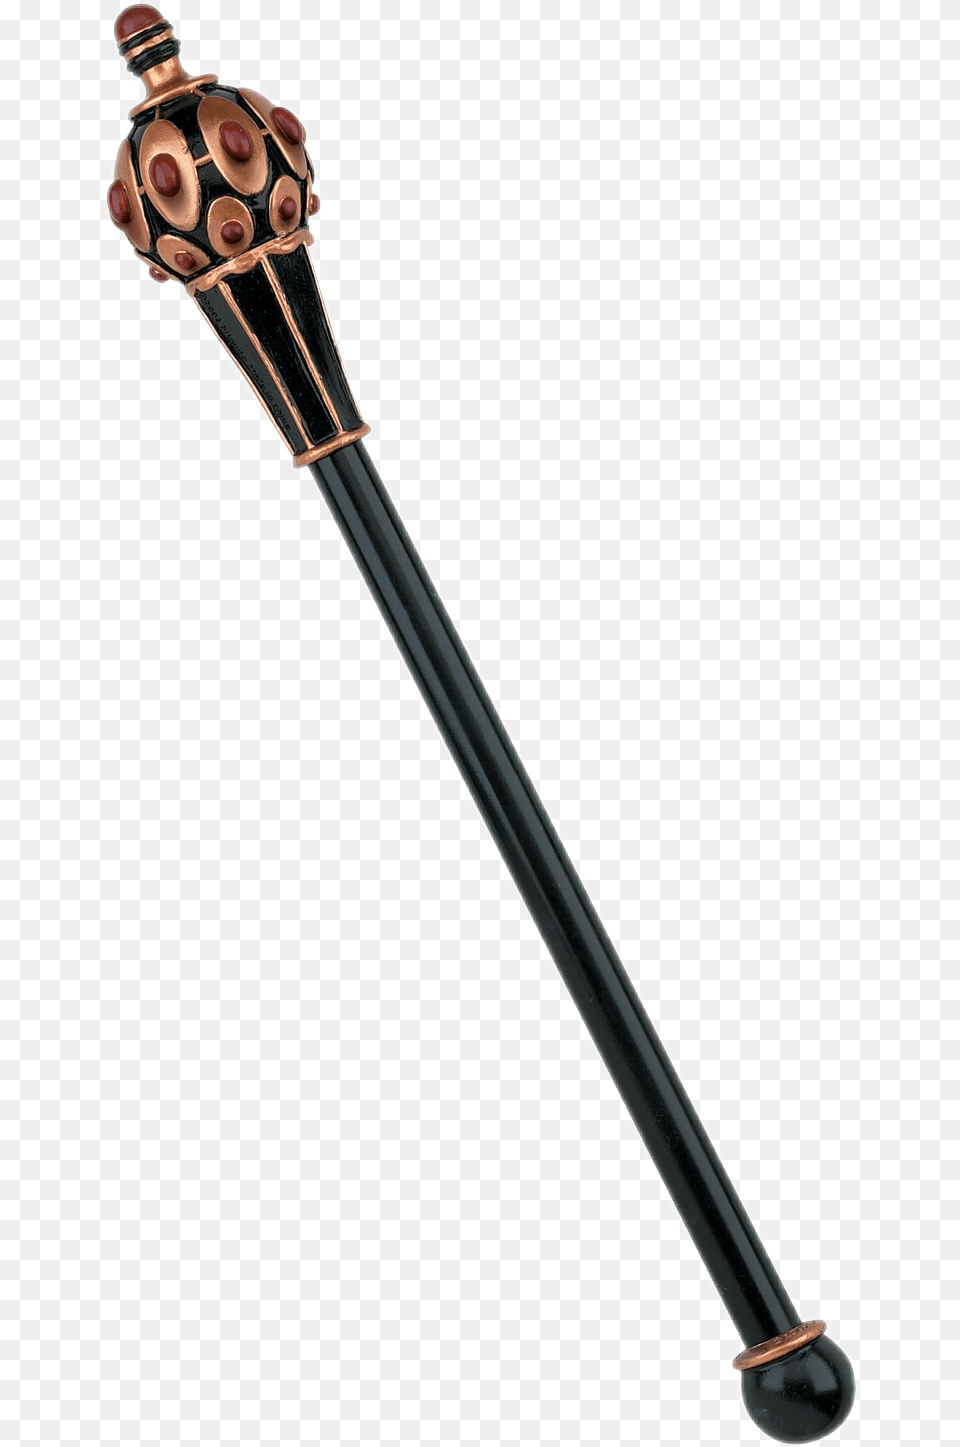 Download Scepter King Queen Royalty Cane Pole Rod Harry Potter Narcissa Wand, Sword, Weapon, Mace Club, Stick Free Png